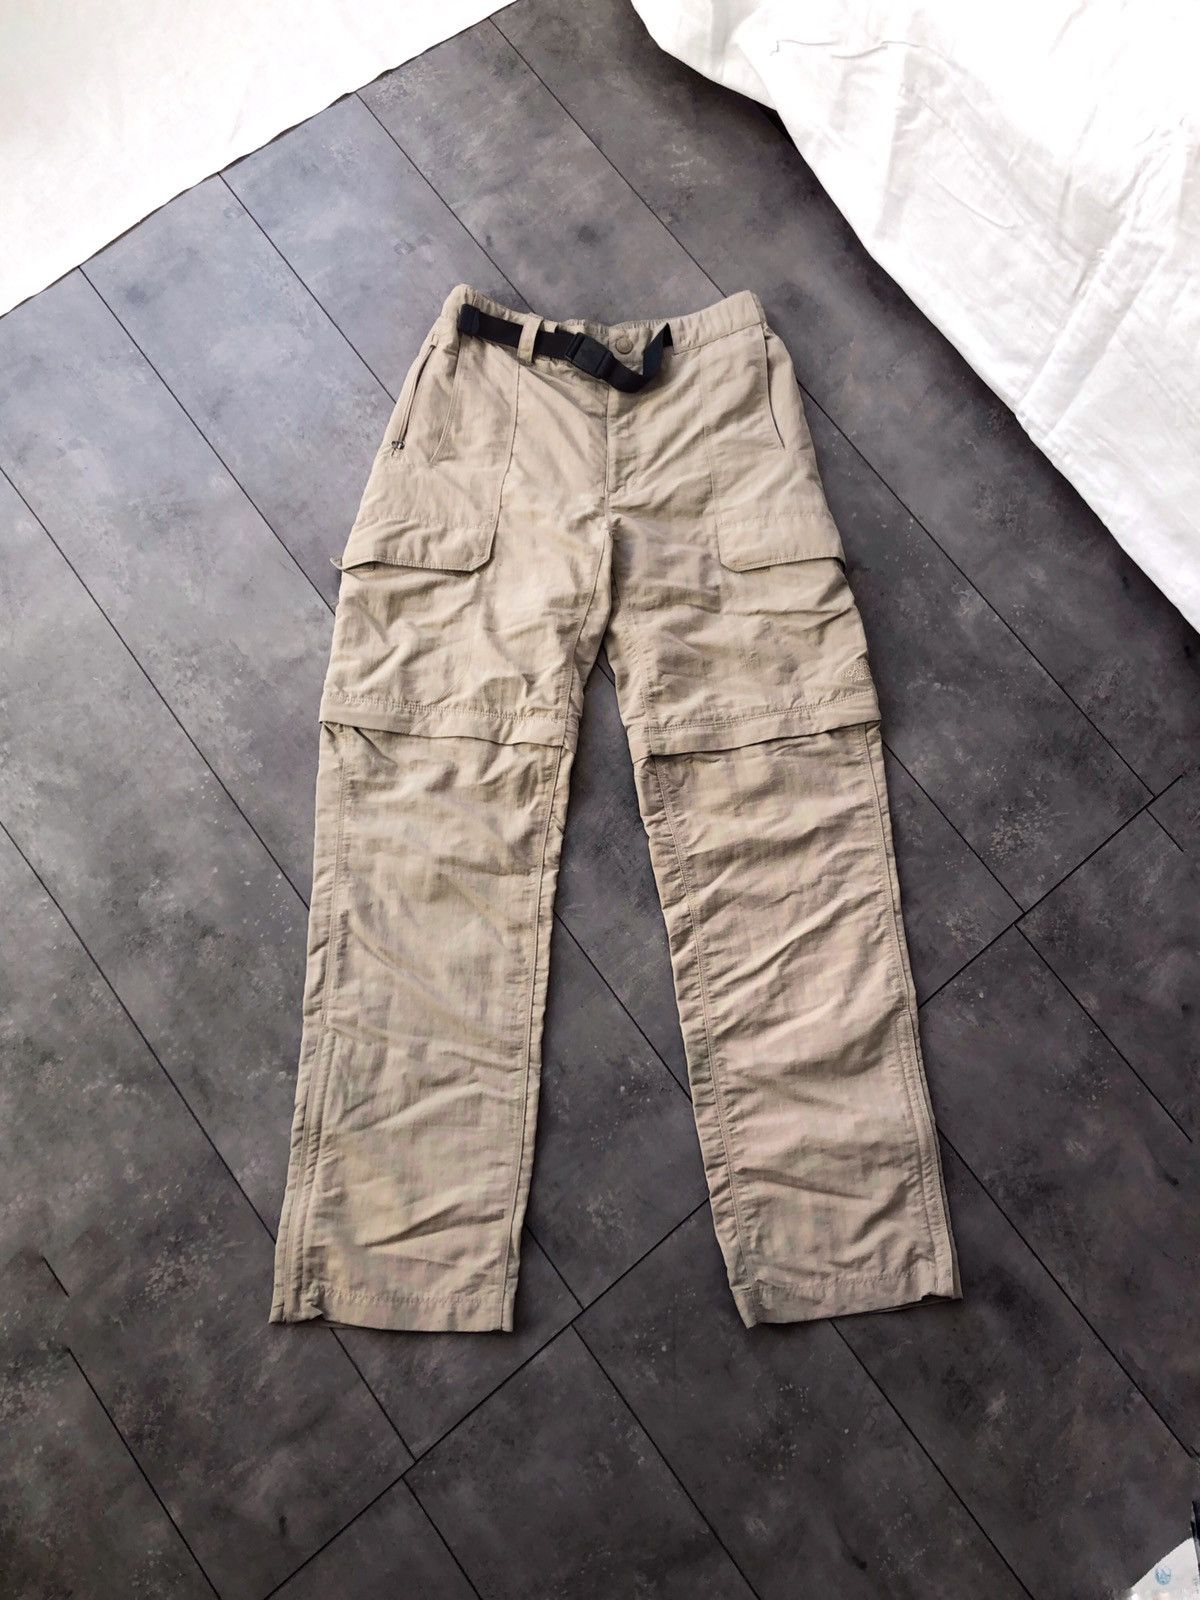 The North Face transformer 2 in 1 cargo pants travis scott